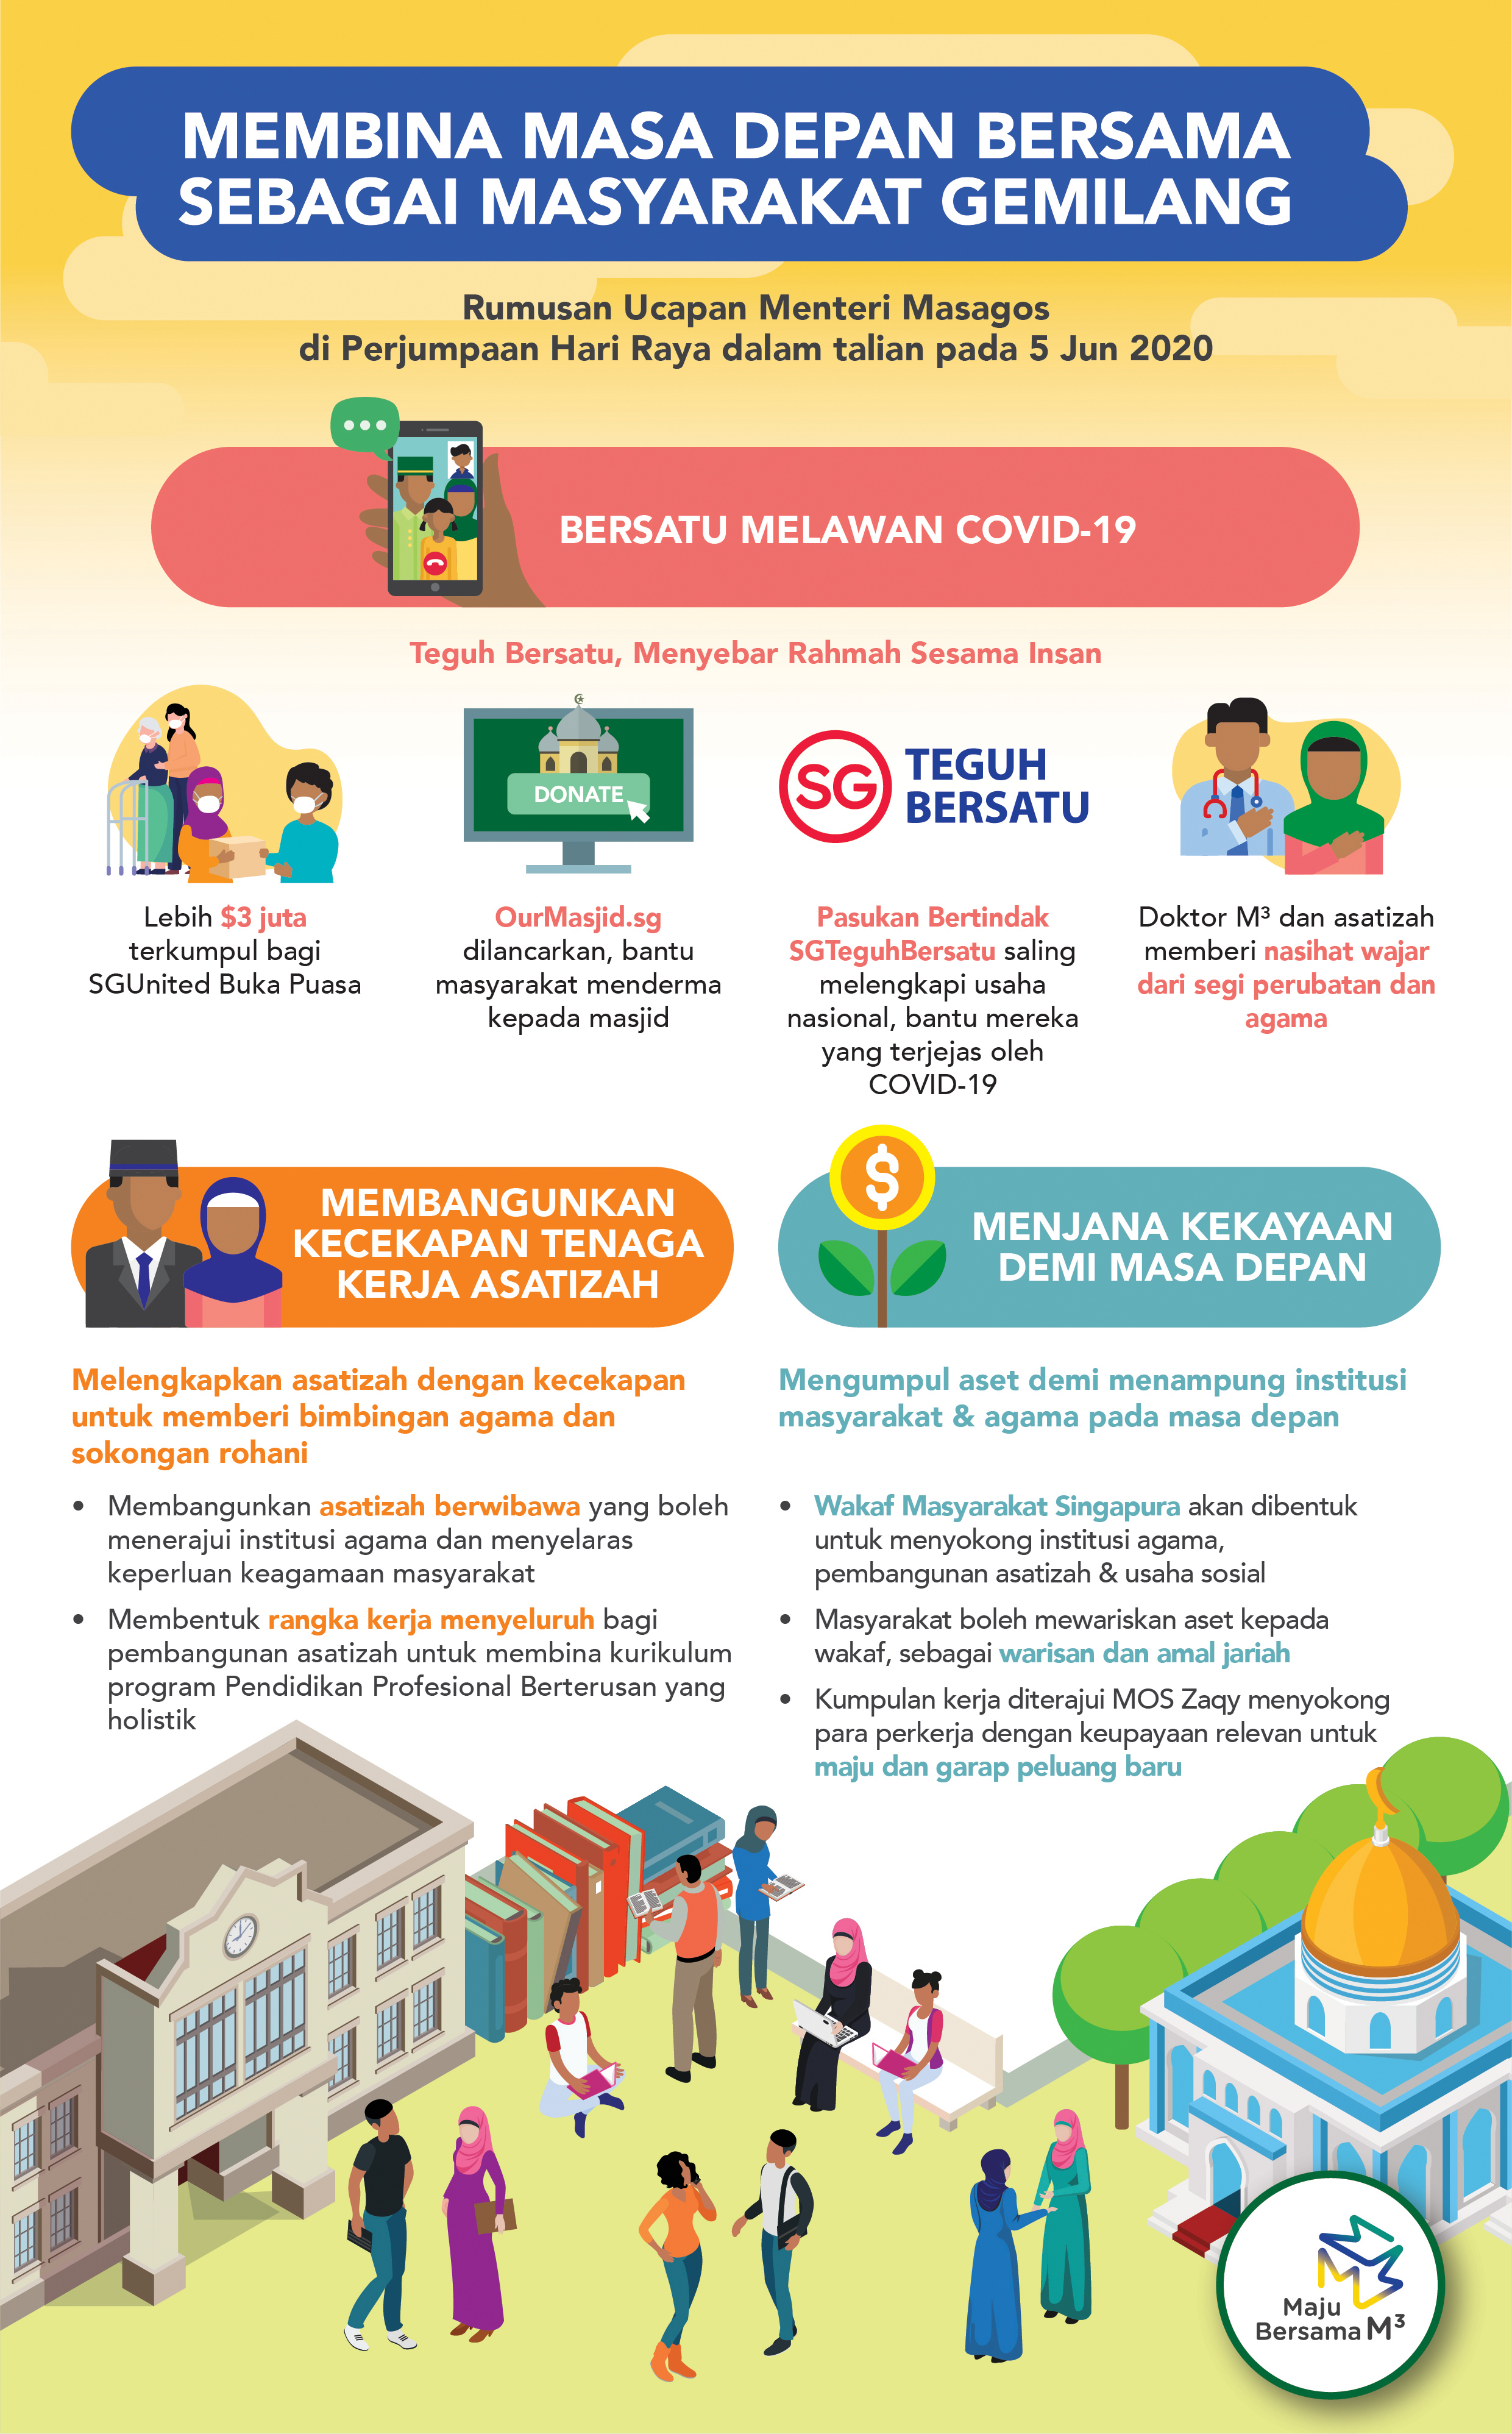 M3 Infographic in Malay